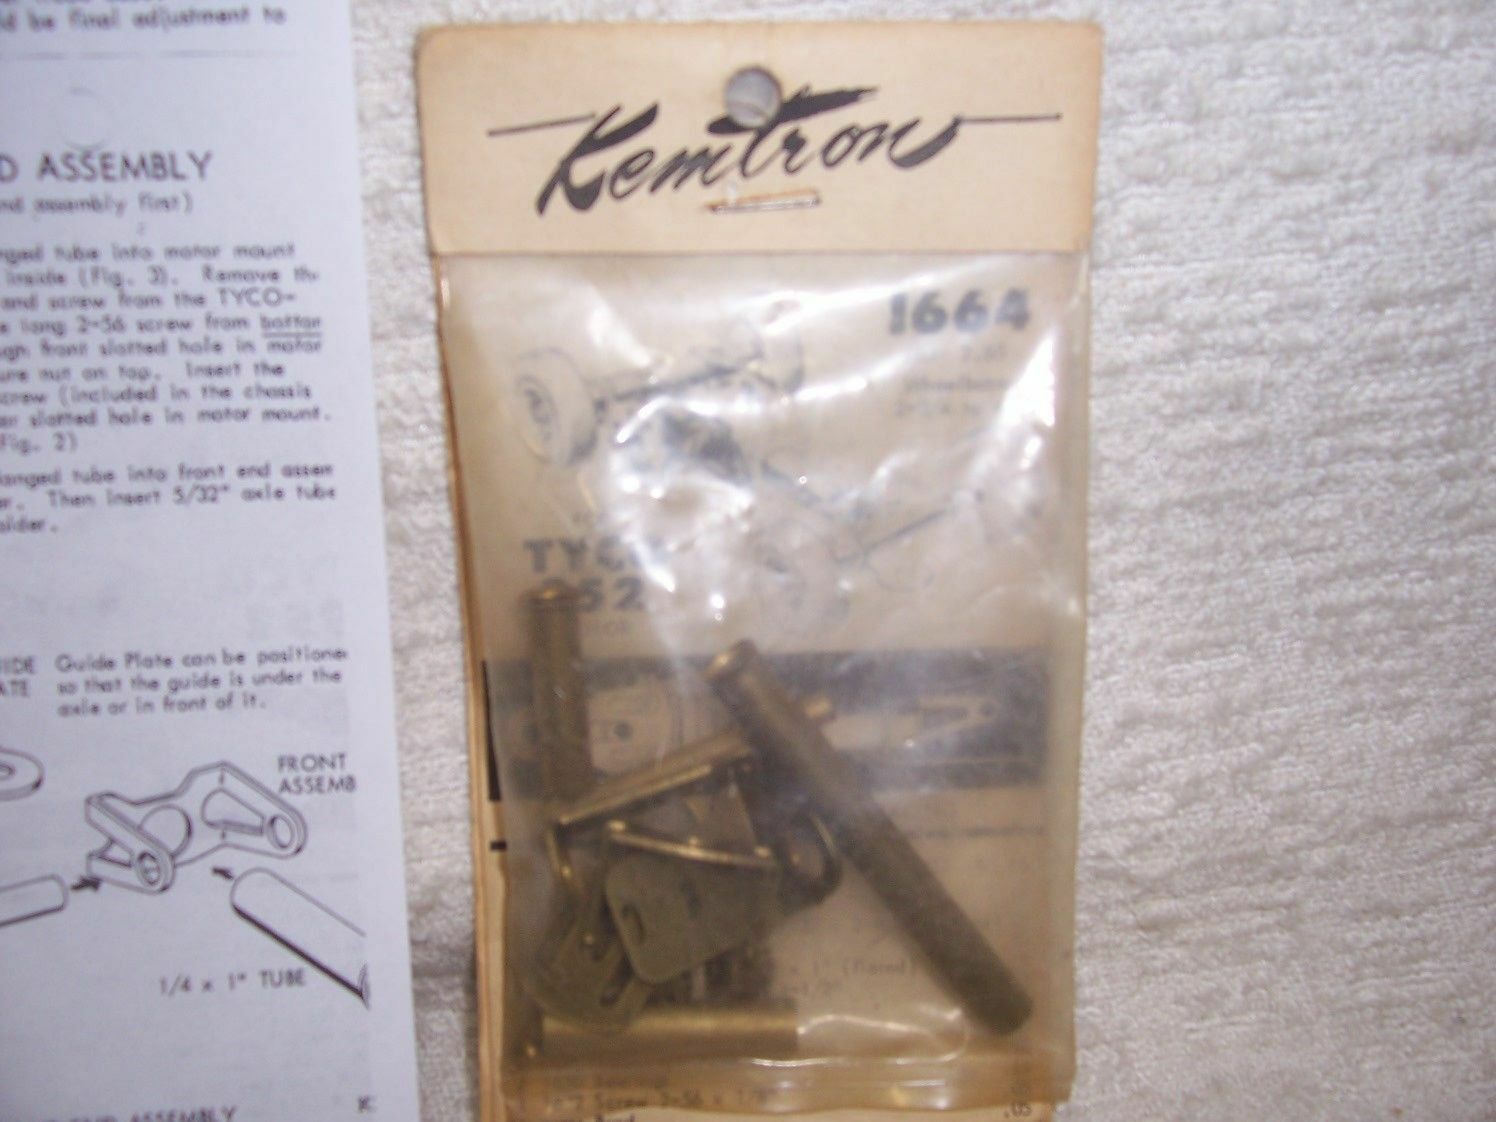 1/32 Vintage Kemtron Brass Slot Car Chassis Kit #1664 For Tyco 952 Open Motors